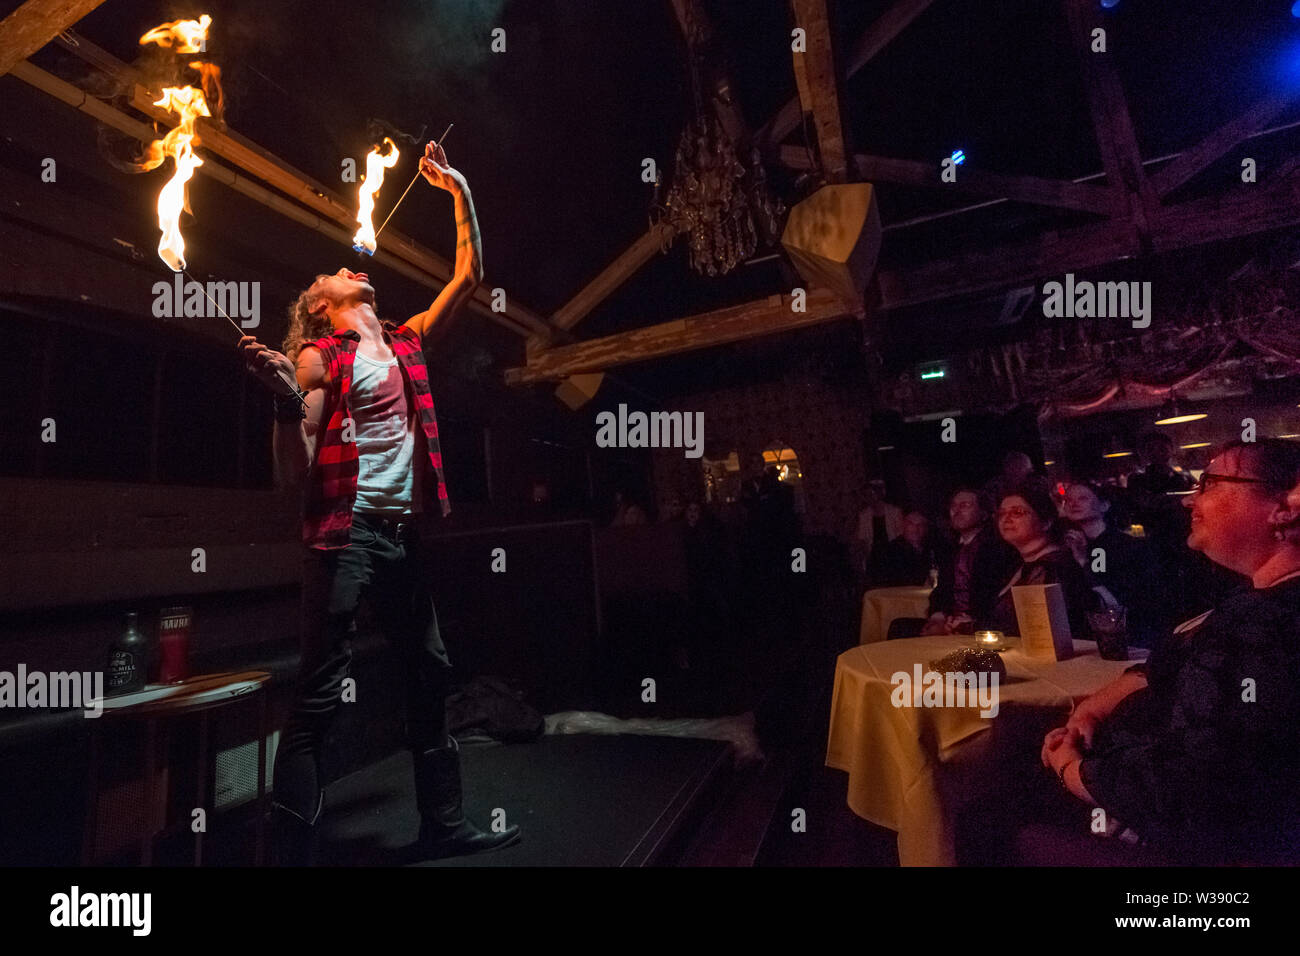 London, UK. 13th July, 2019. Heavy Metal Pete performs at VampFest ‘Children of the Night’ cabaret and burlesque show at The Birdcage Cabaret venue in Camden. Part of the annual International Vampire Film and Arts Festival (IVFAF). Credit: Guy Corbishley/Alamy Live News Stock Photo